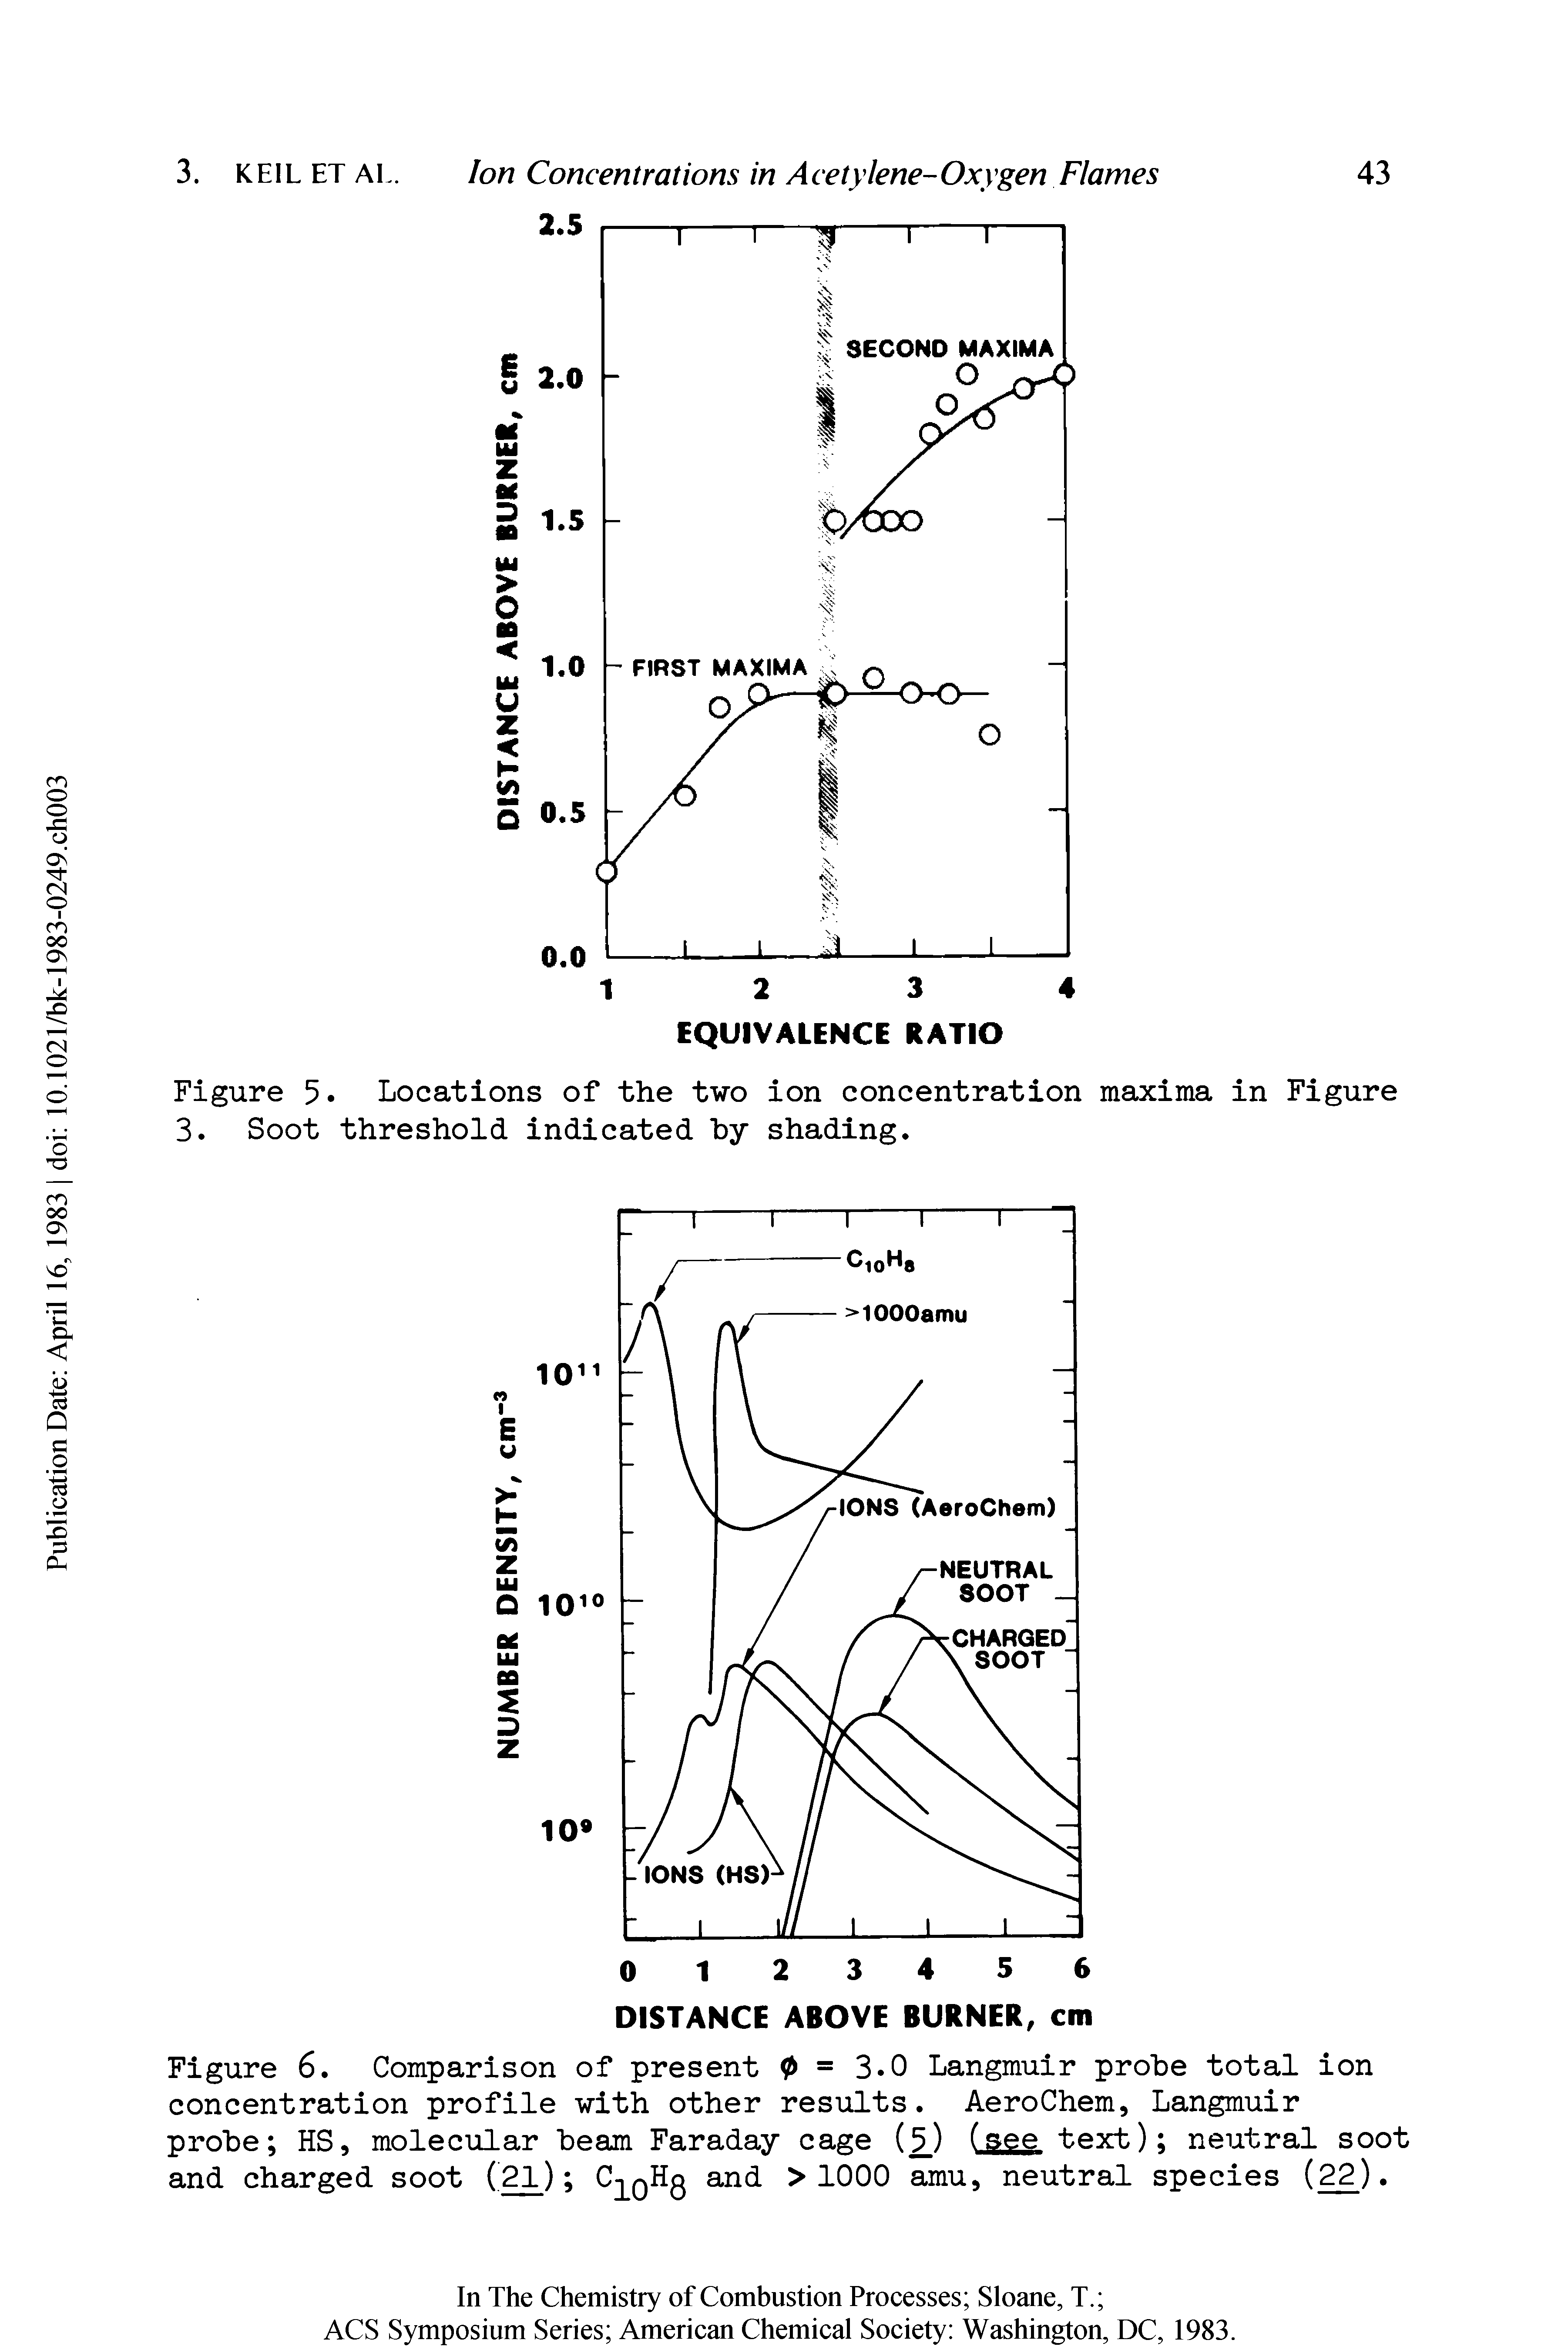 Figure 6. Comparison of present 0 = 3.0 Langmuir probe total ion concentration profile with other results. AeroChem, Langmuir probe HS, molecular beam Faraday cage ( ) (see text) neutral soot and charged soot (2l) > 1000 amu, neutral species (22).